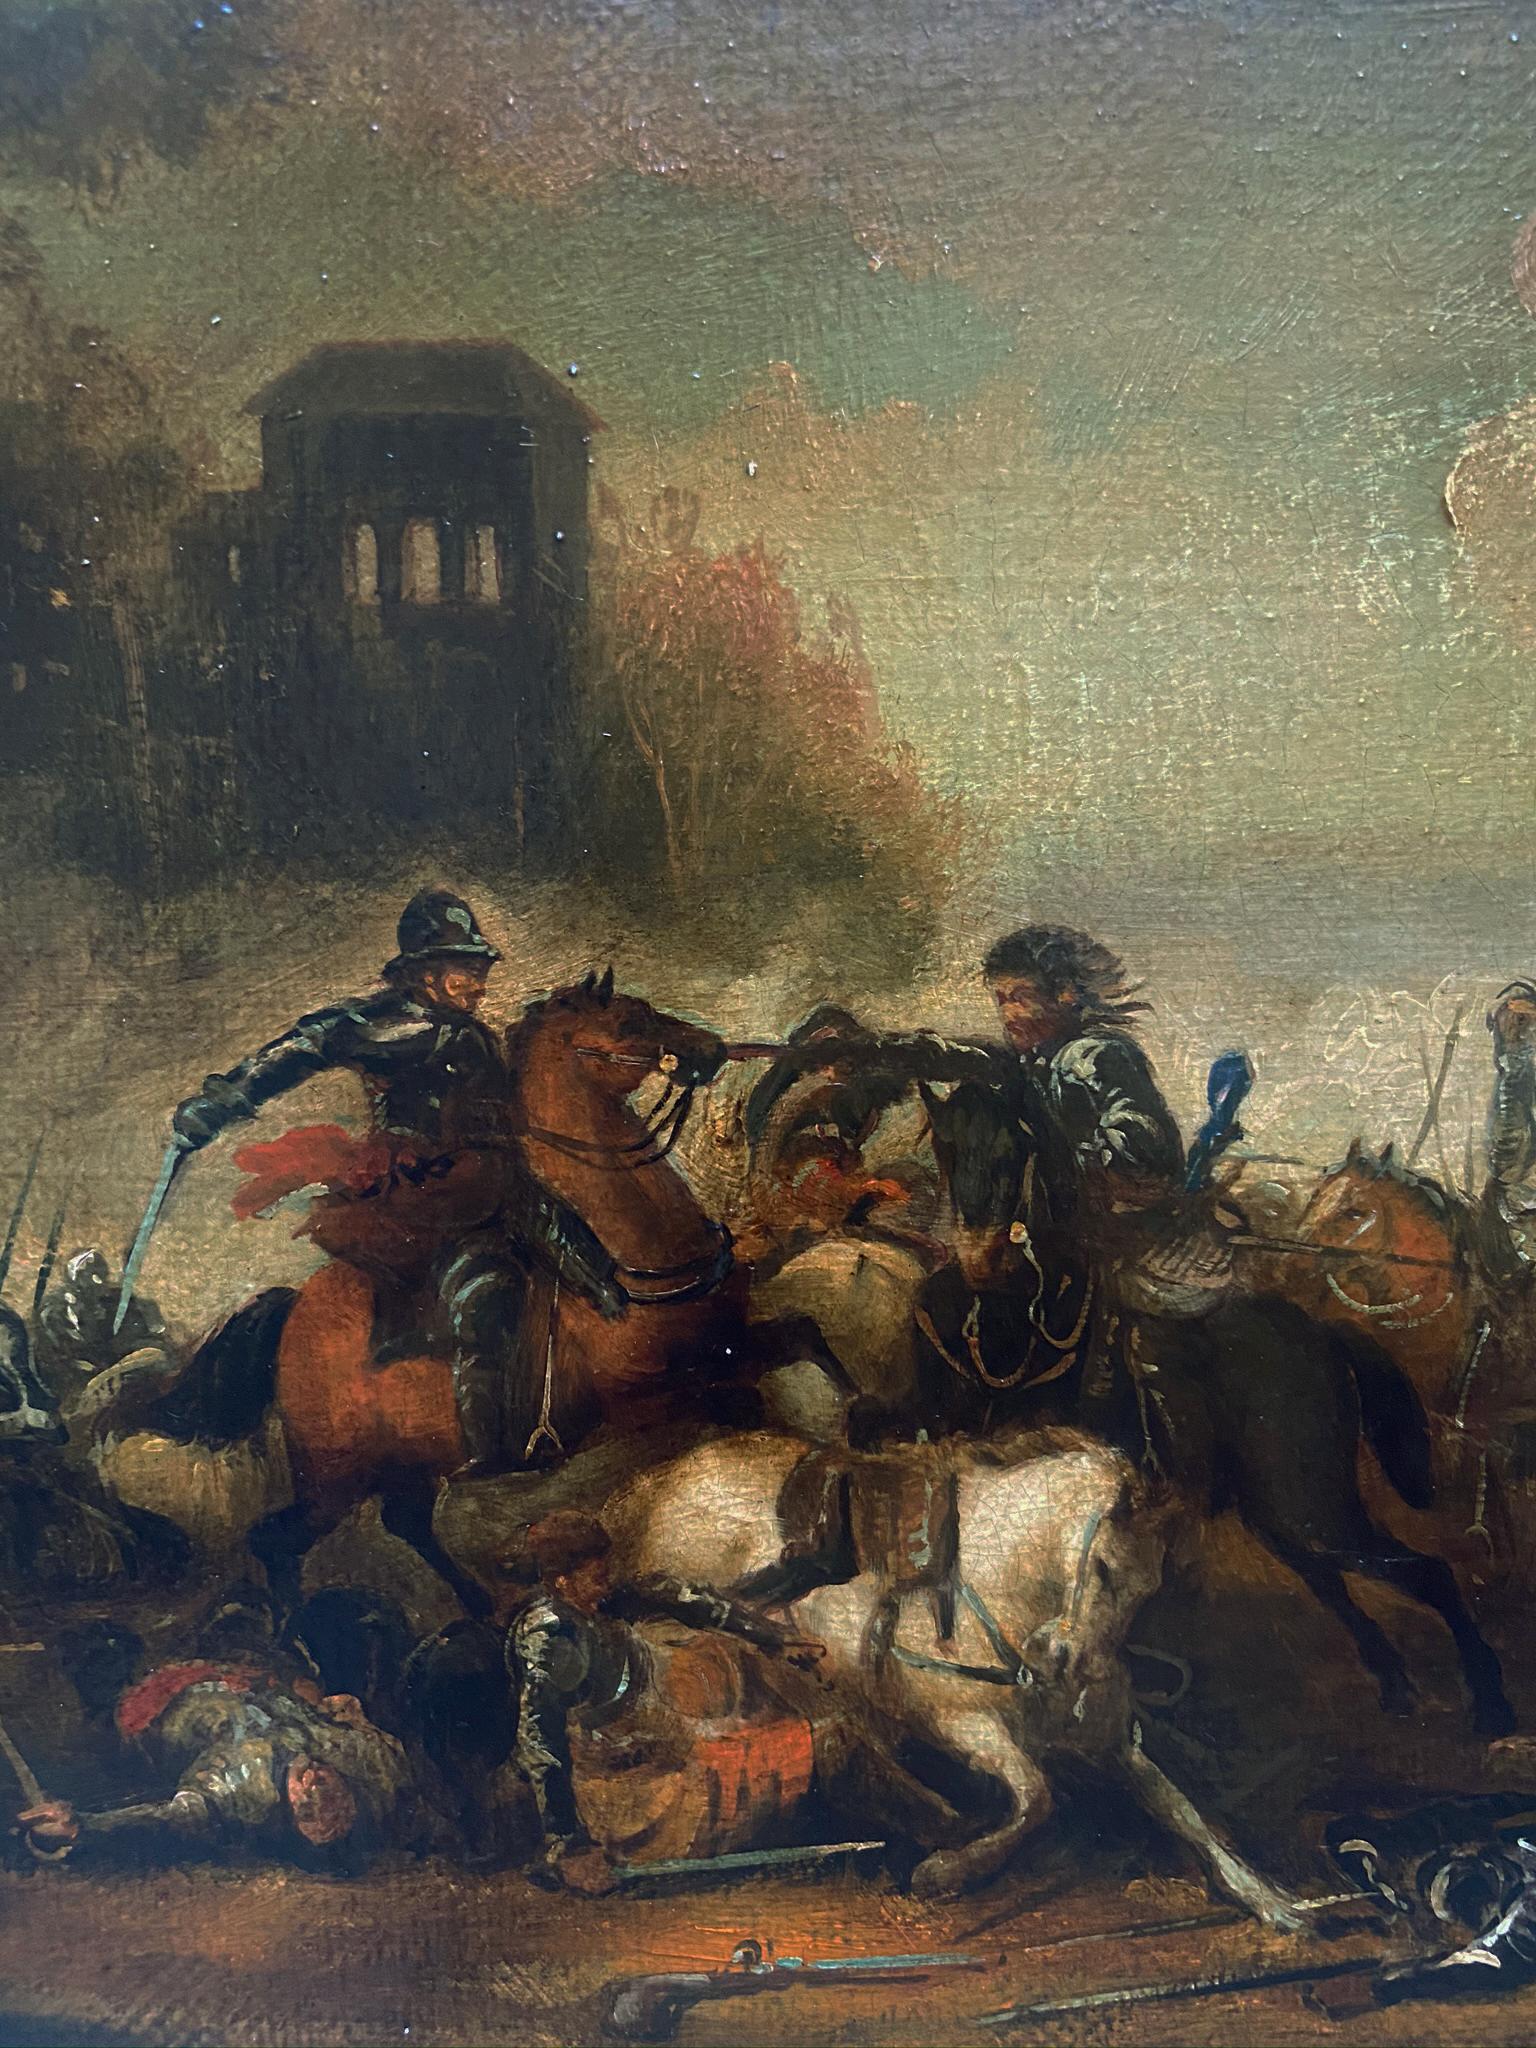 Land Battle - Antonio Savisio Italia 2006 - Oil on canvas cm. 30x80
Gold leaf gilded wooden frame available on request

Maestro Antonio Savisio drew inspiration from the masterpieces of the great Neapolitan Maestro Salvator Rosa who was the author